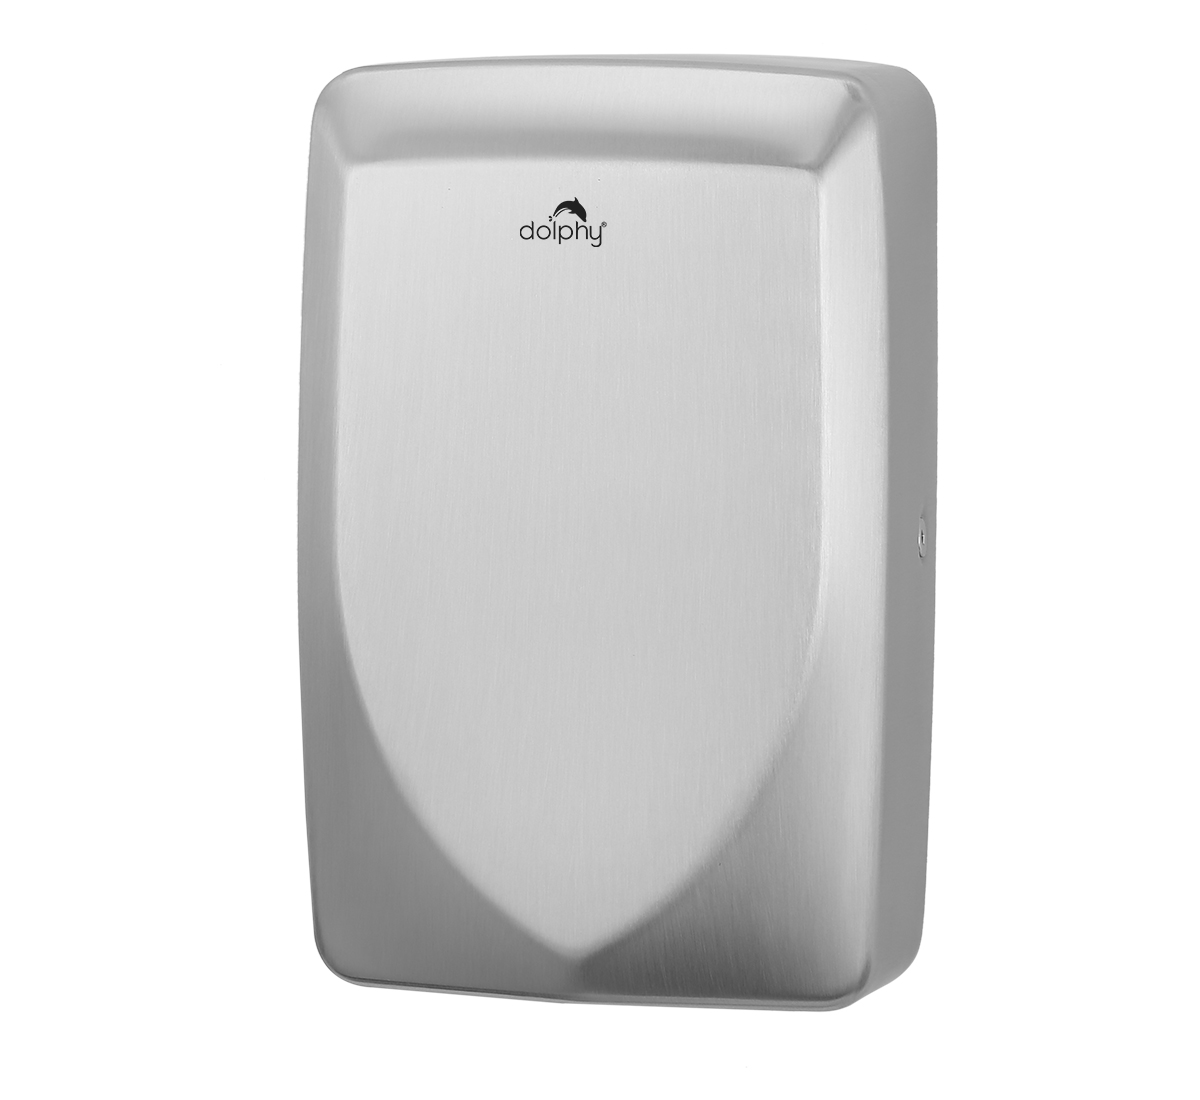 700W Stainless Steel Compact Hand Dryer
